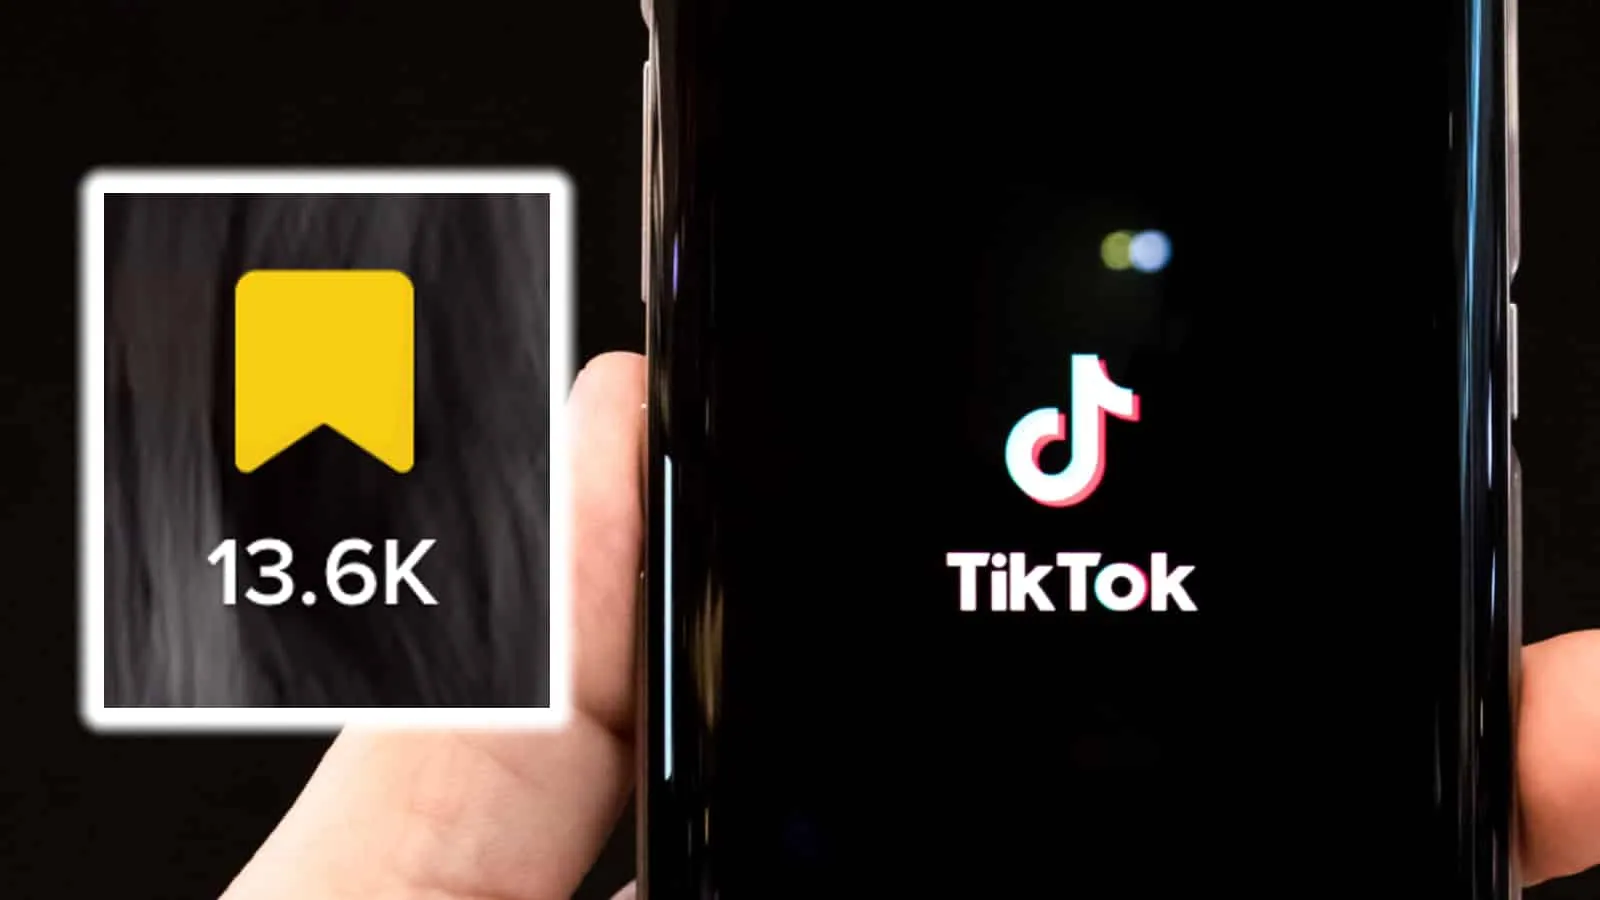 How To See Who Favorited Your Video On TikTok